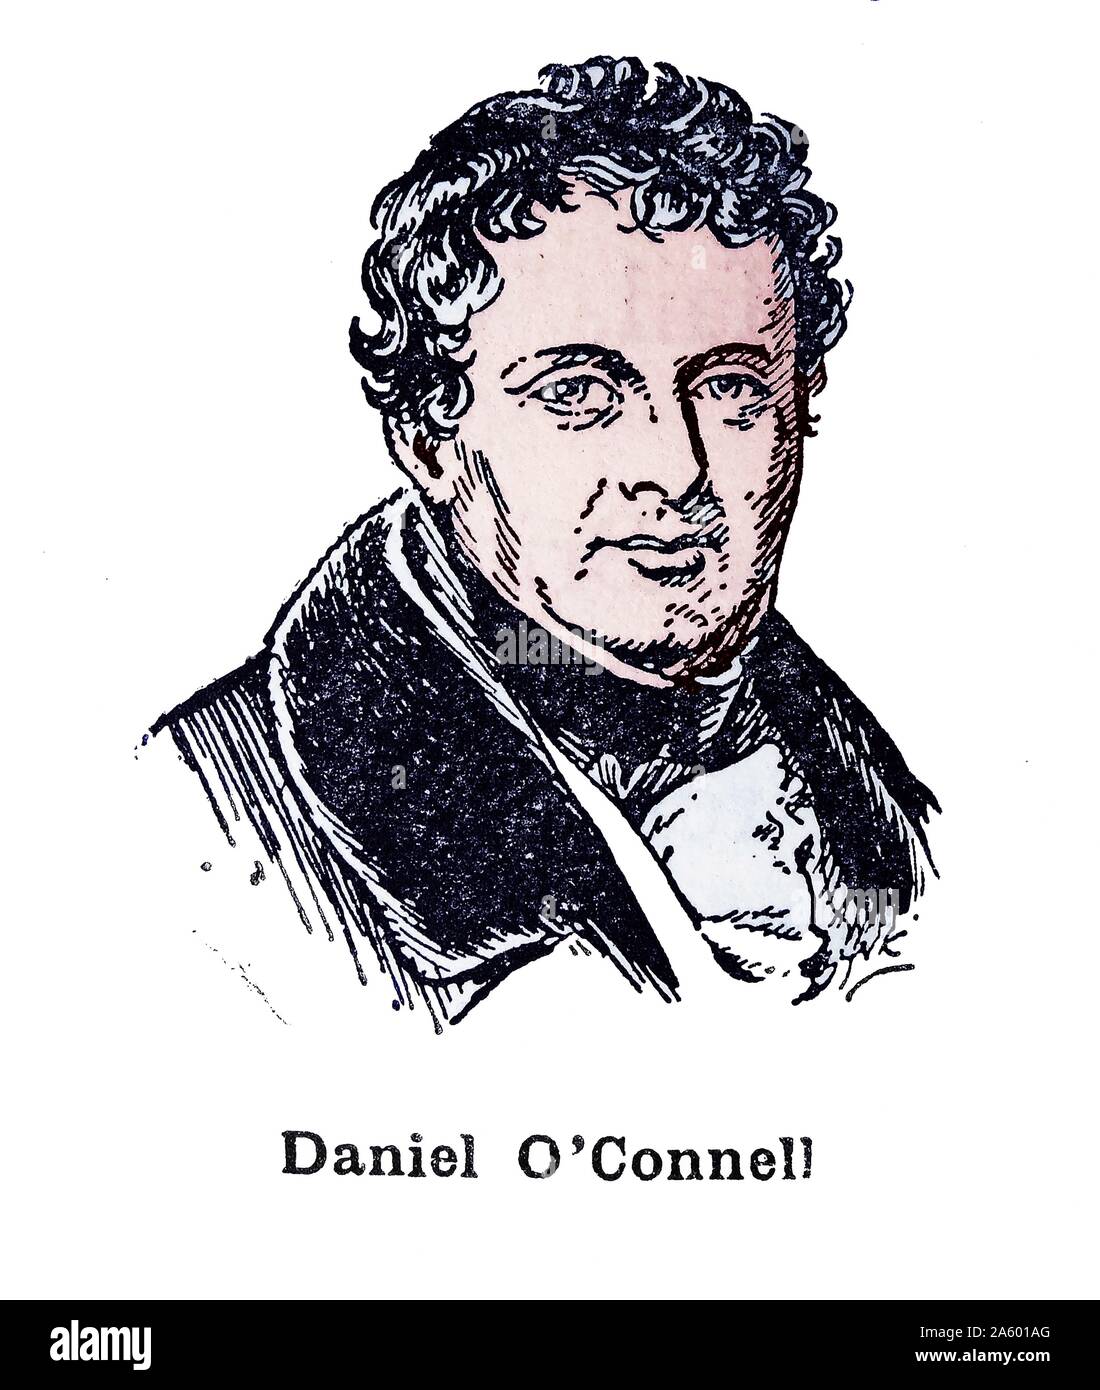 Daniel O'Connell (1775 – 1847); The Liberator or The Emancipator. Irish political leader in the first half of the 19th century Stock Photo